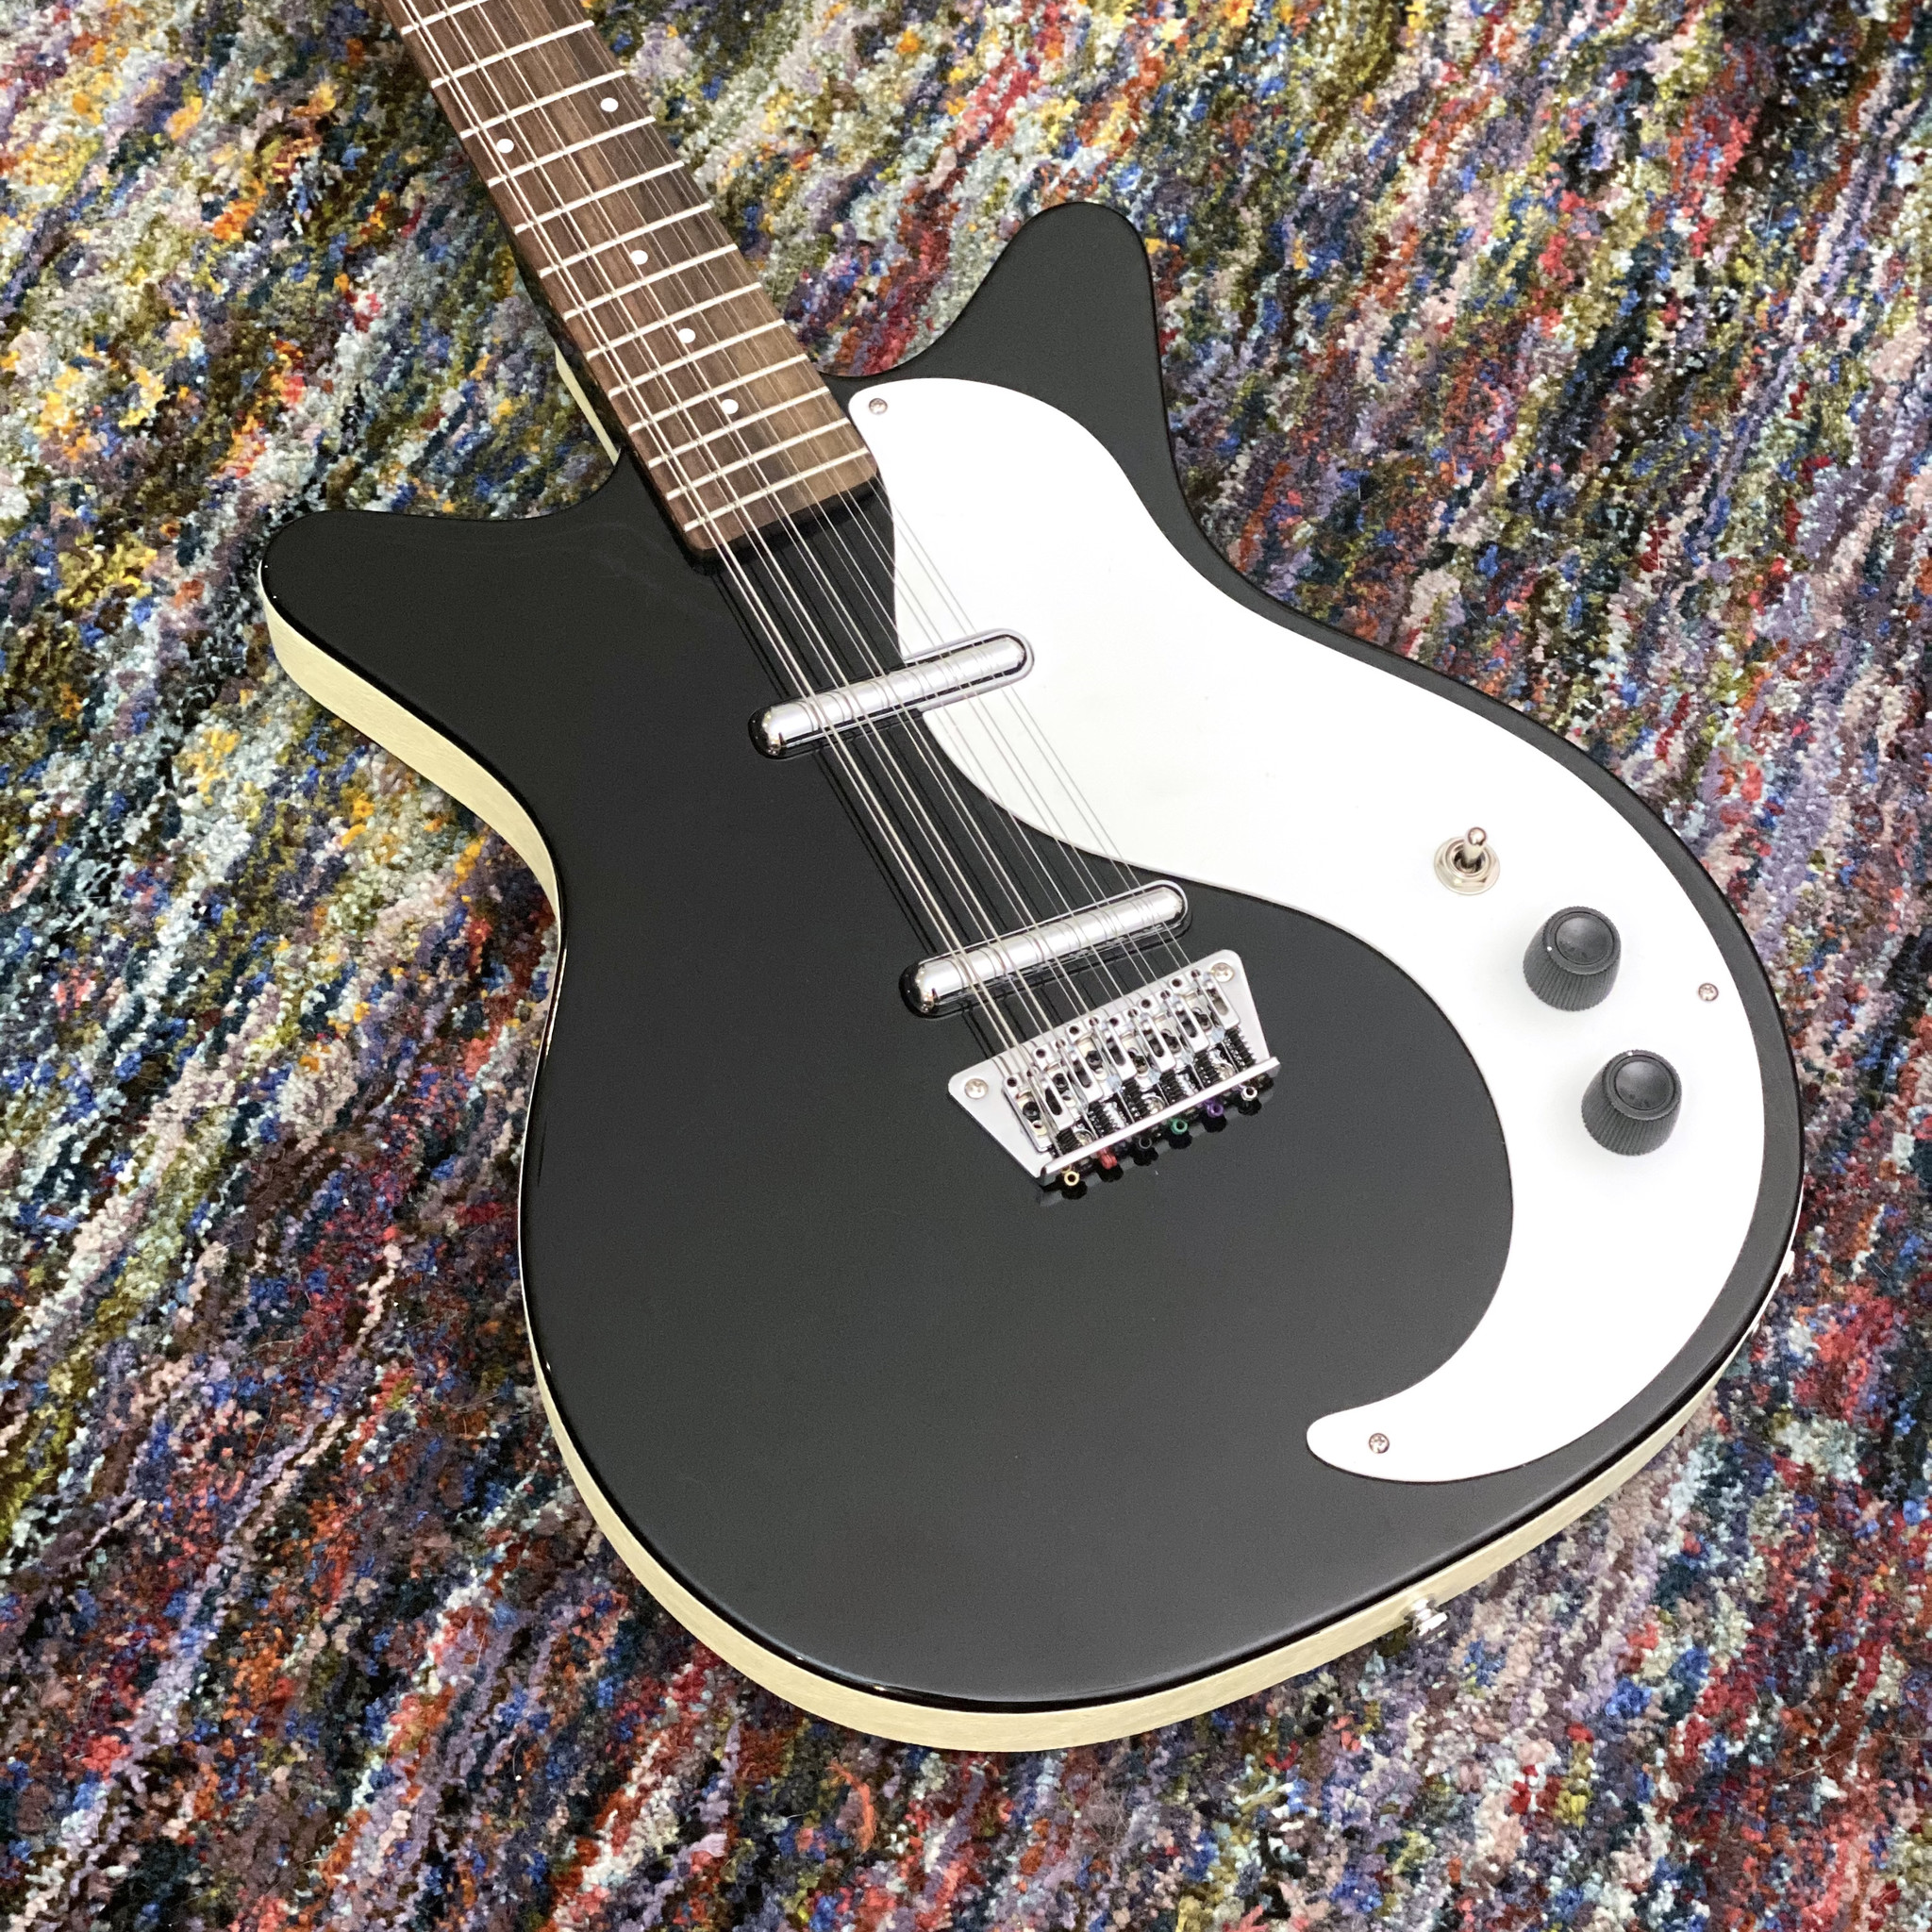 Danelectro '59 Double-Cut 12-String Guitar, Black--The Classic JP-Style Dano with 12!